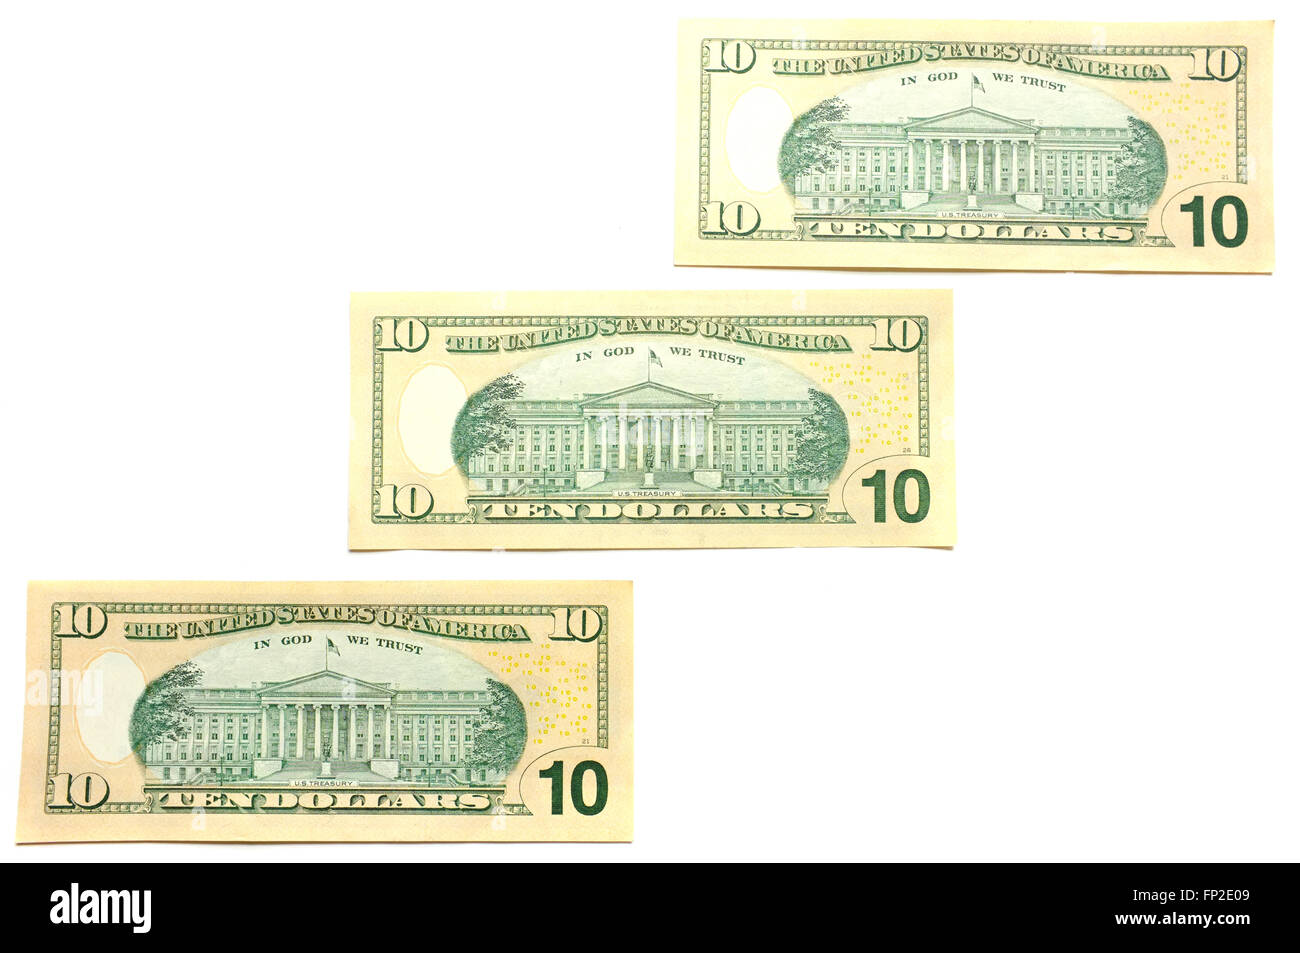 Three American $10 notes photographed against a white background Stock Photo